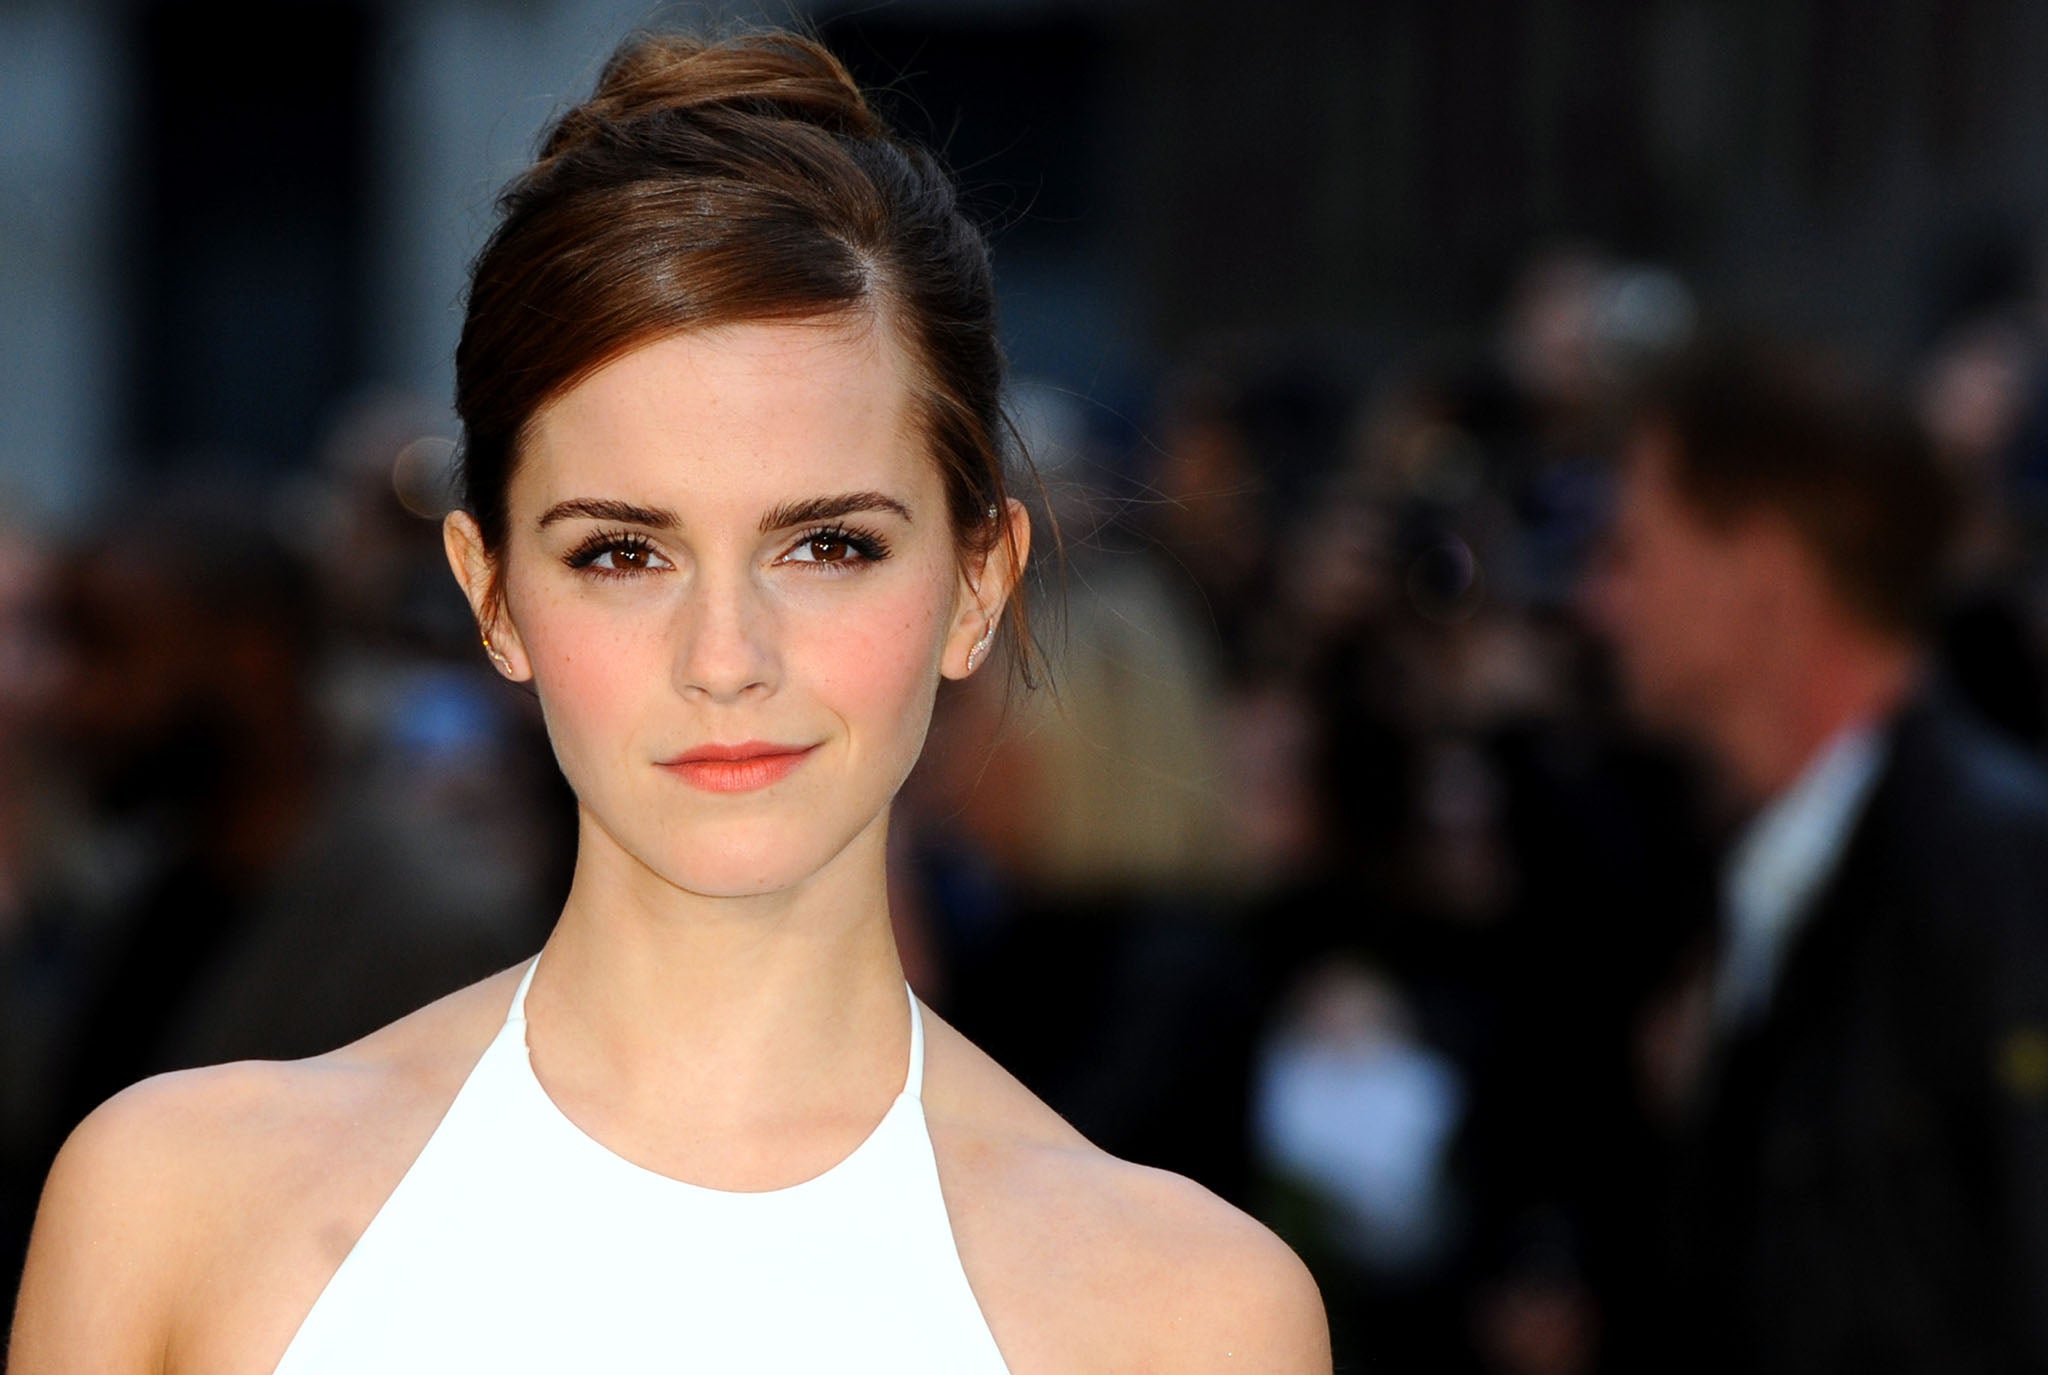 Emma Watson has become the latest target of the 4Chan nude hacking scandal